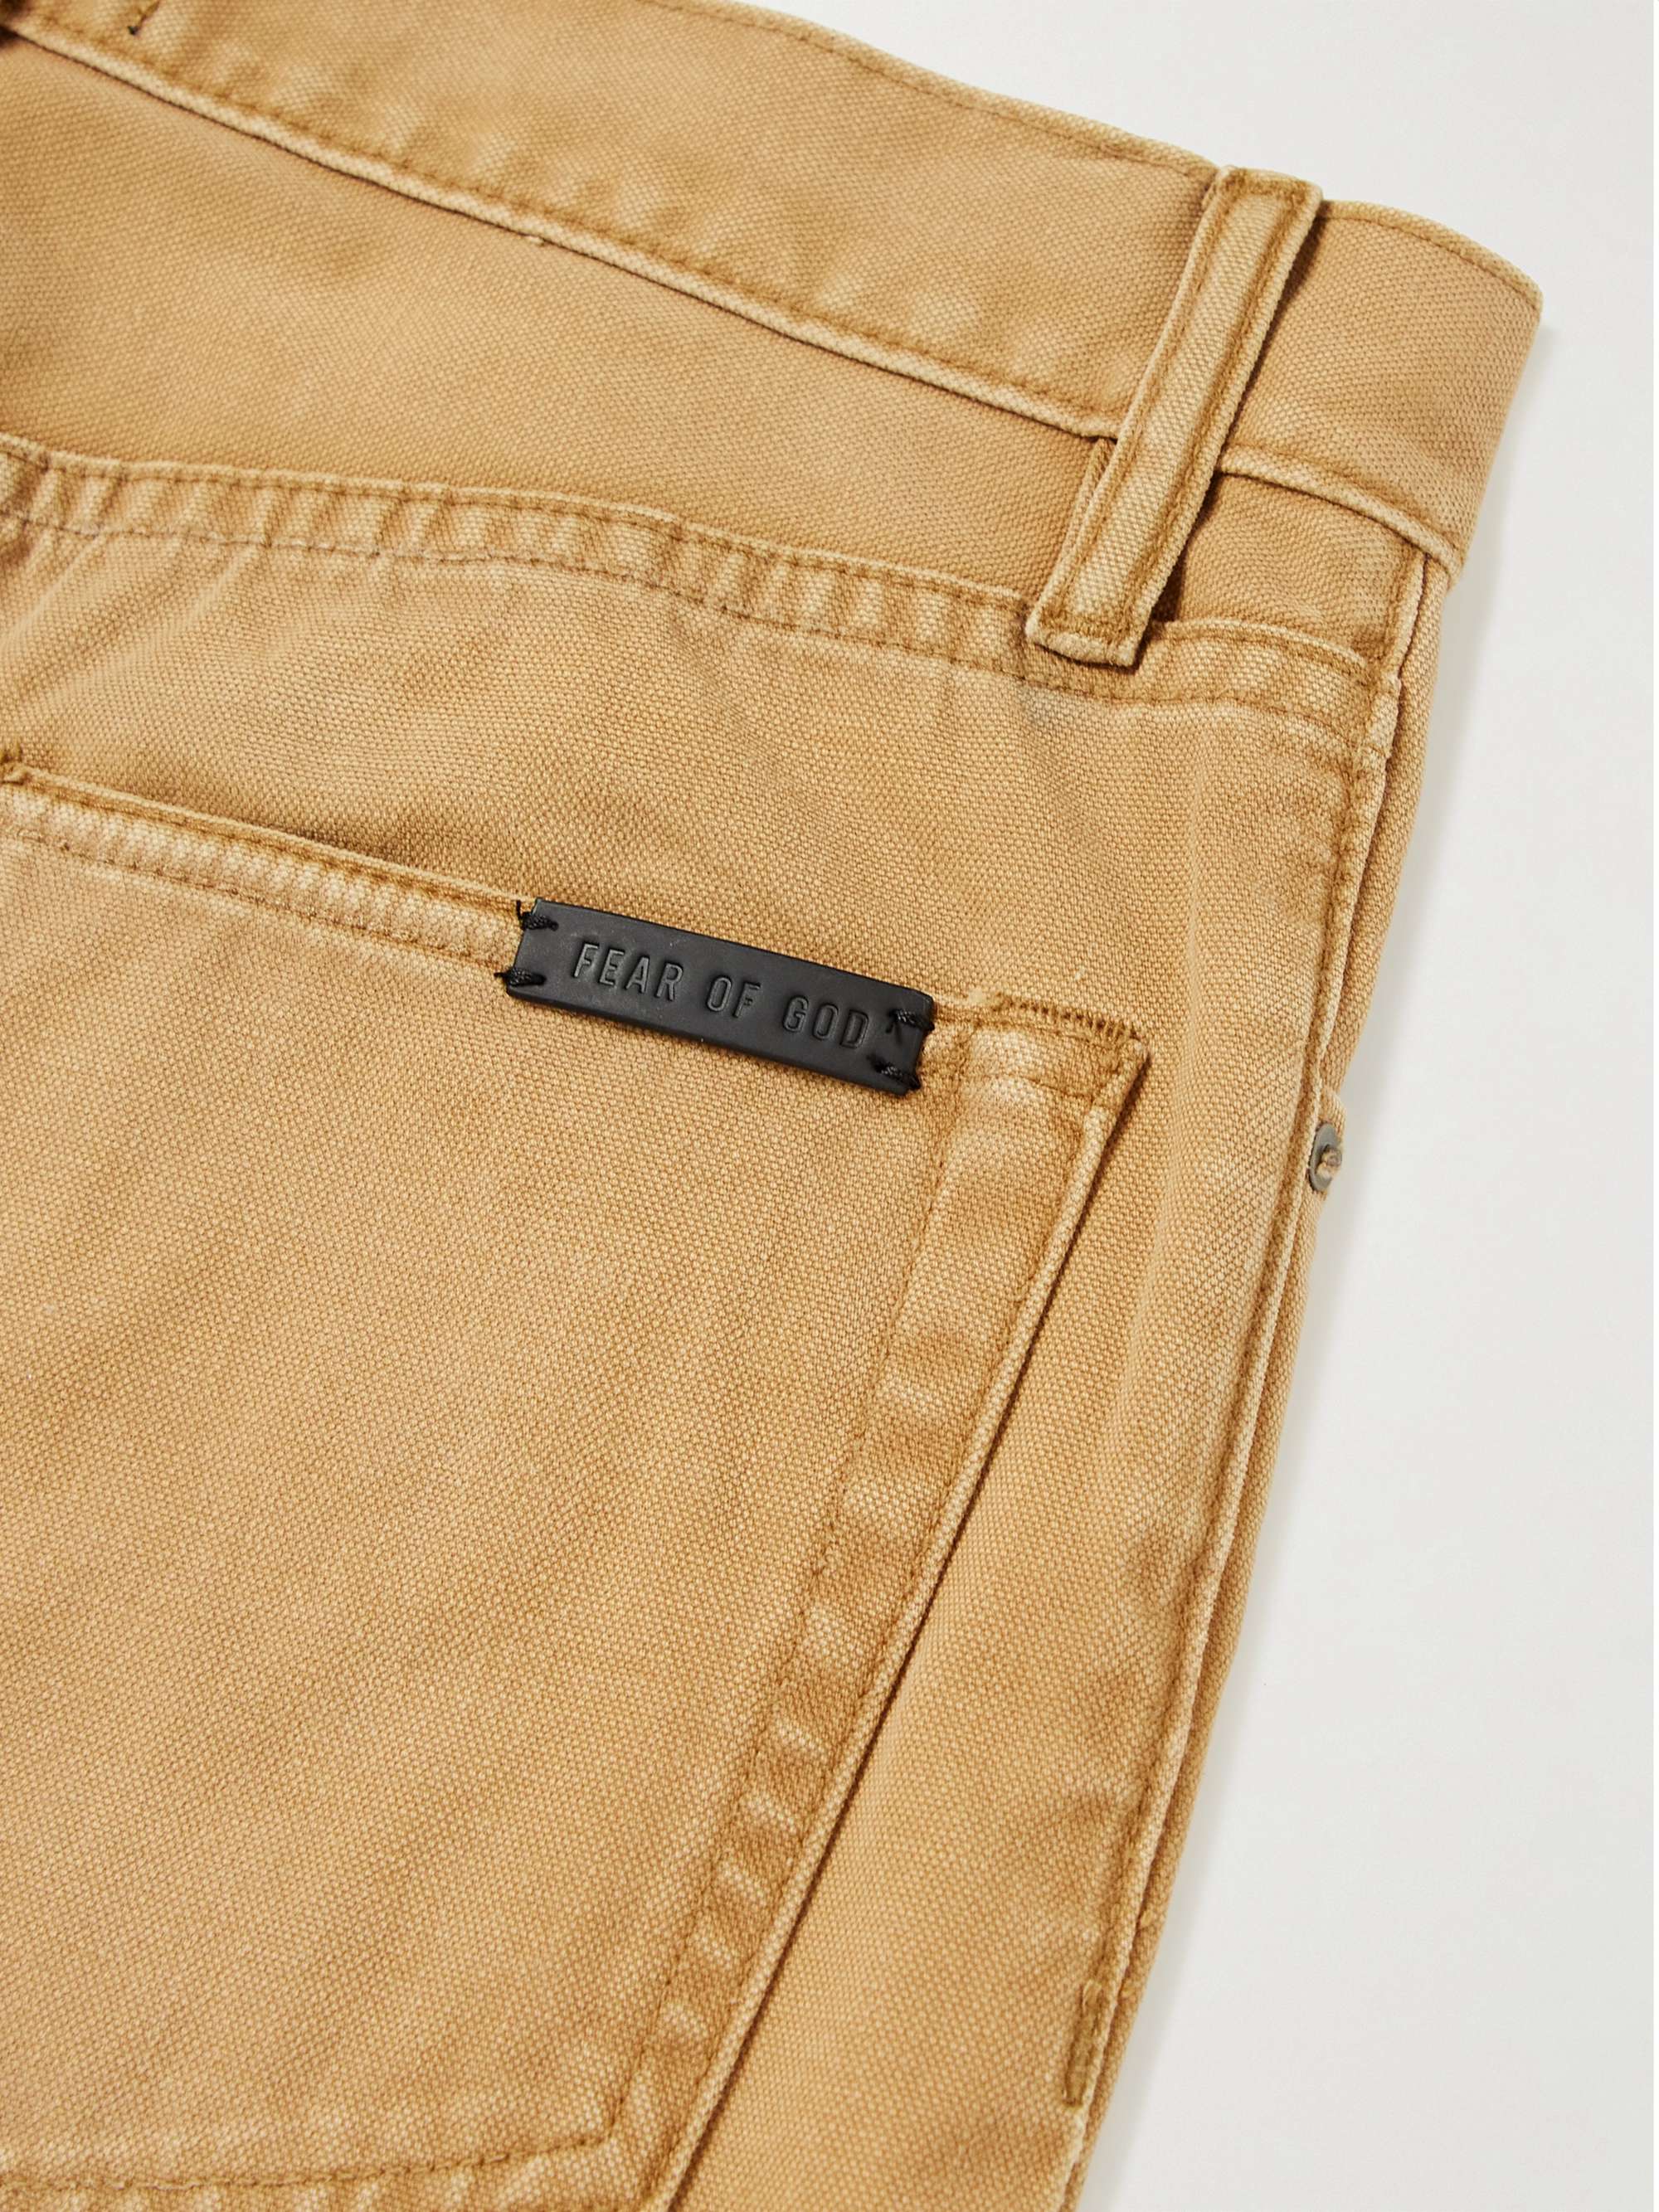 FEAR OF GOD Slim-Fit Jeans